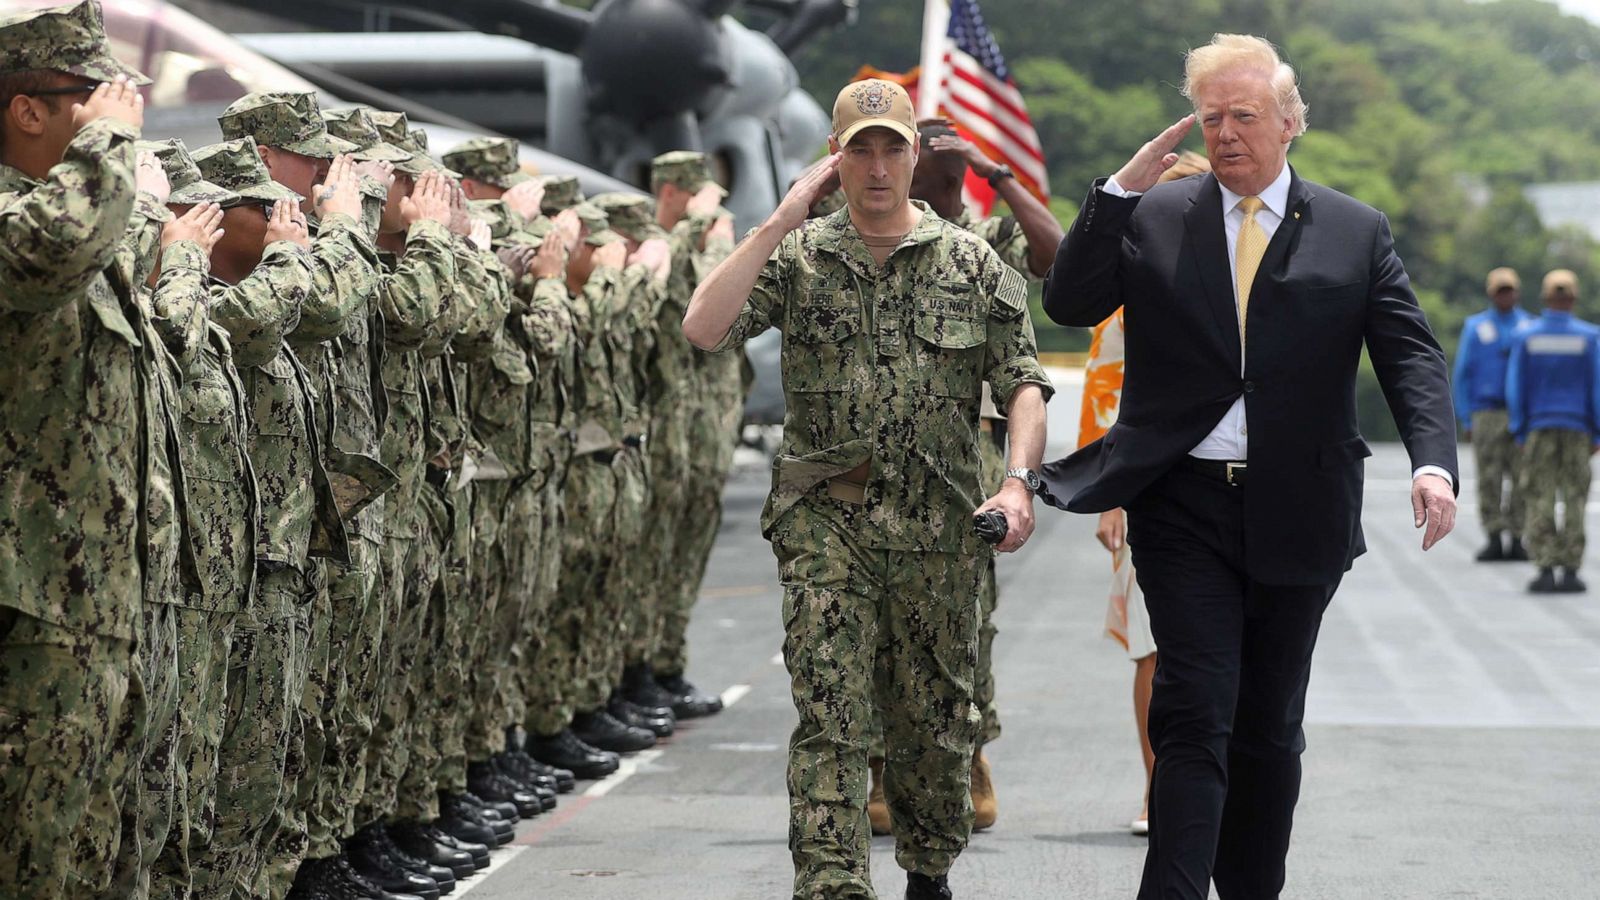 Trump and the troops